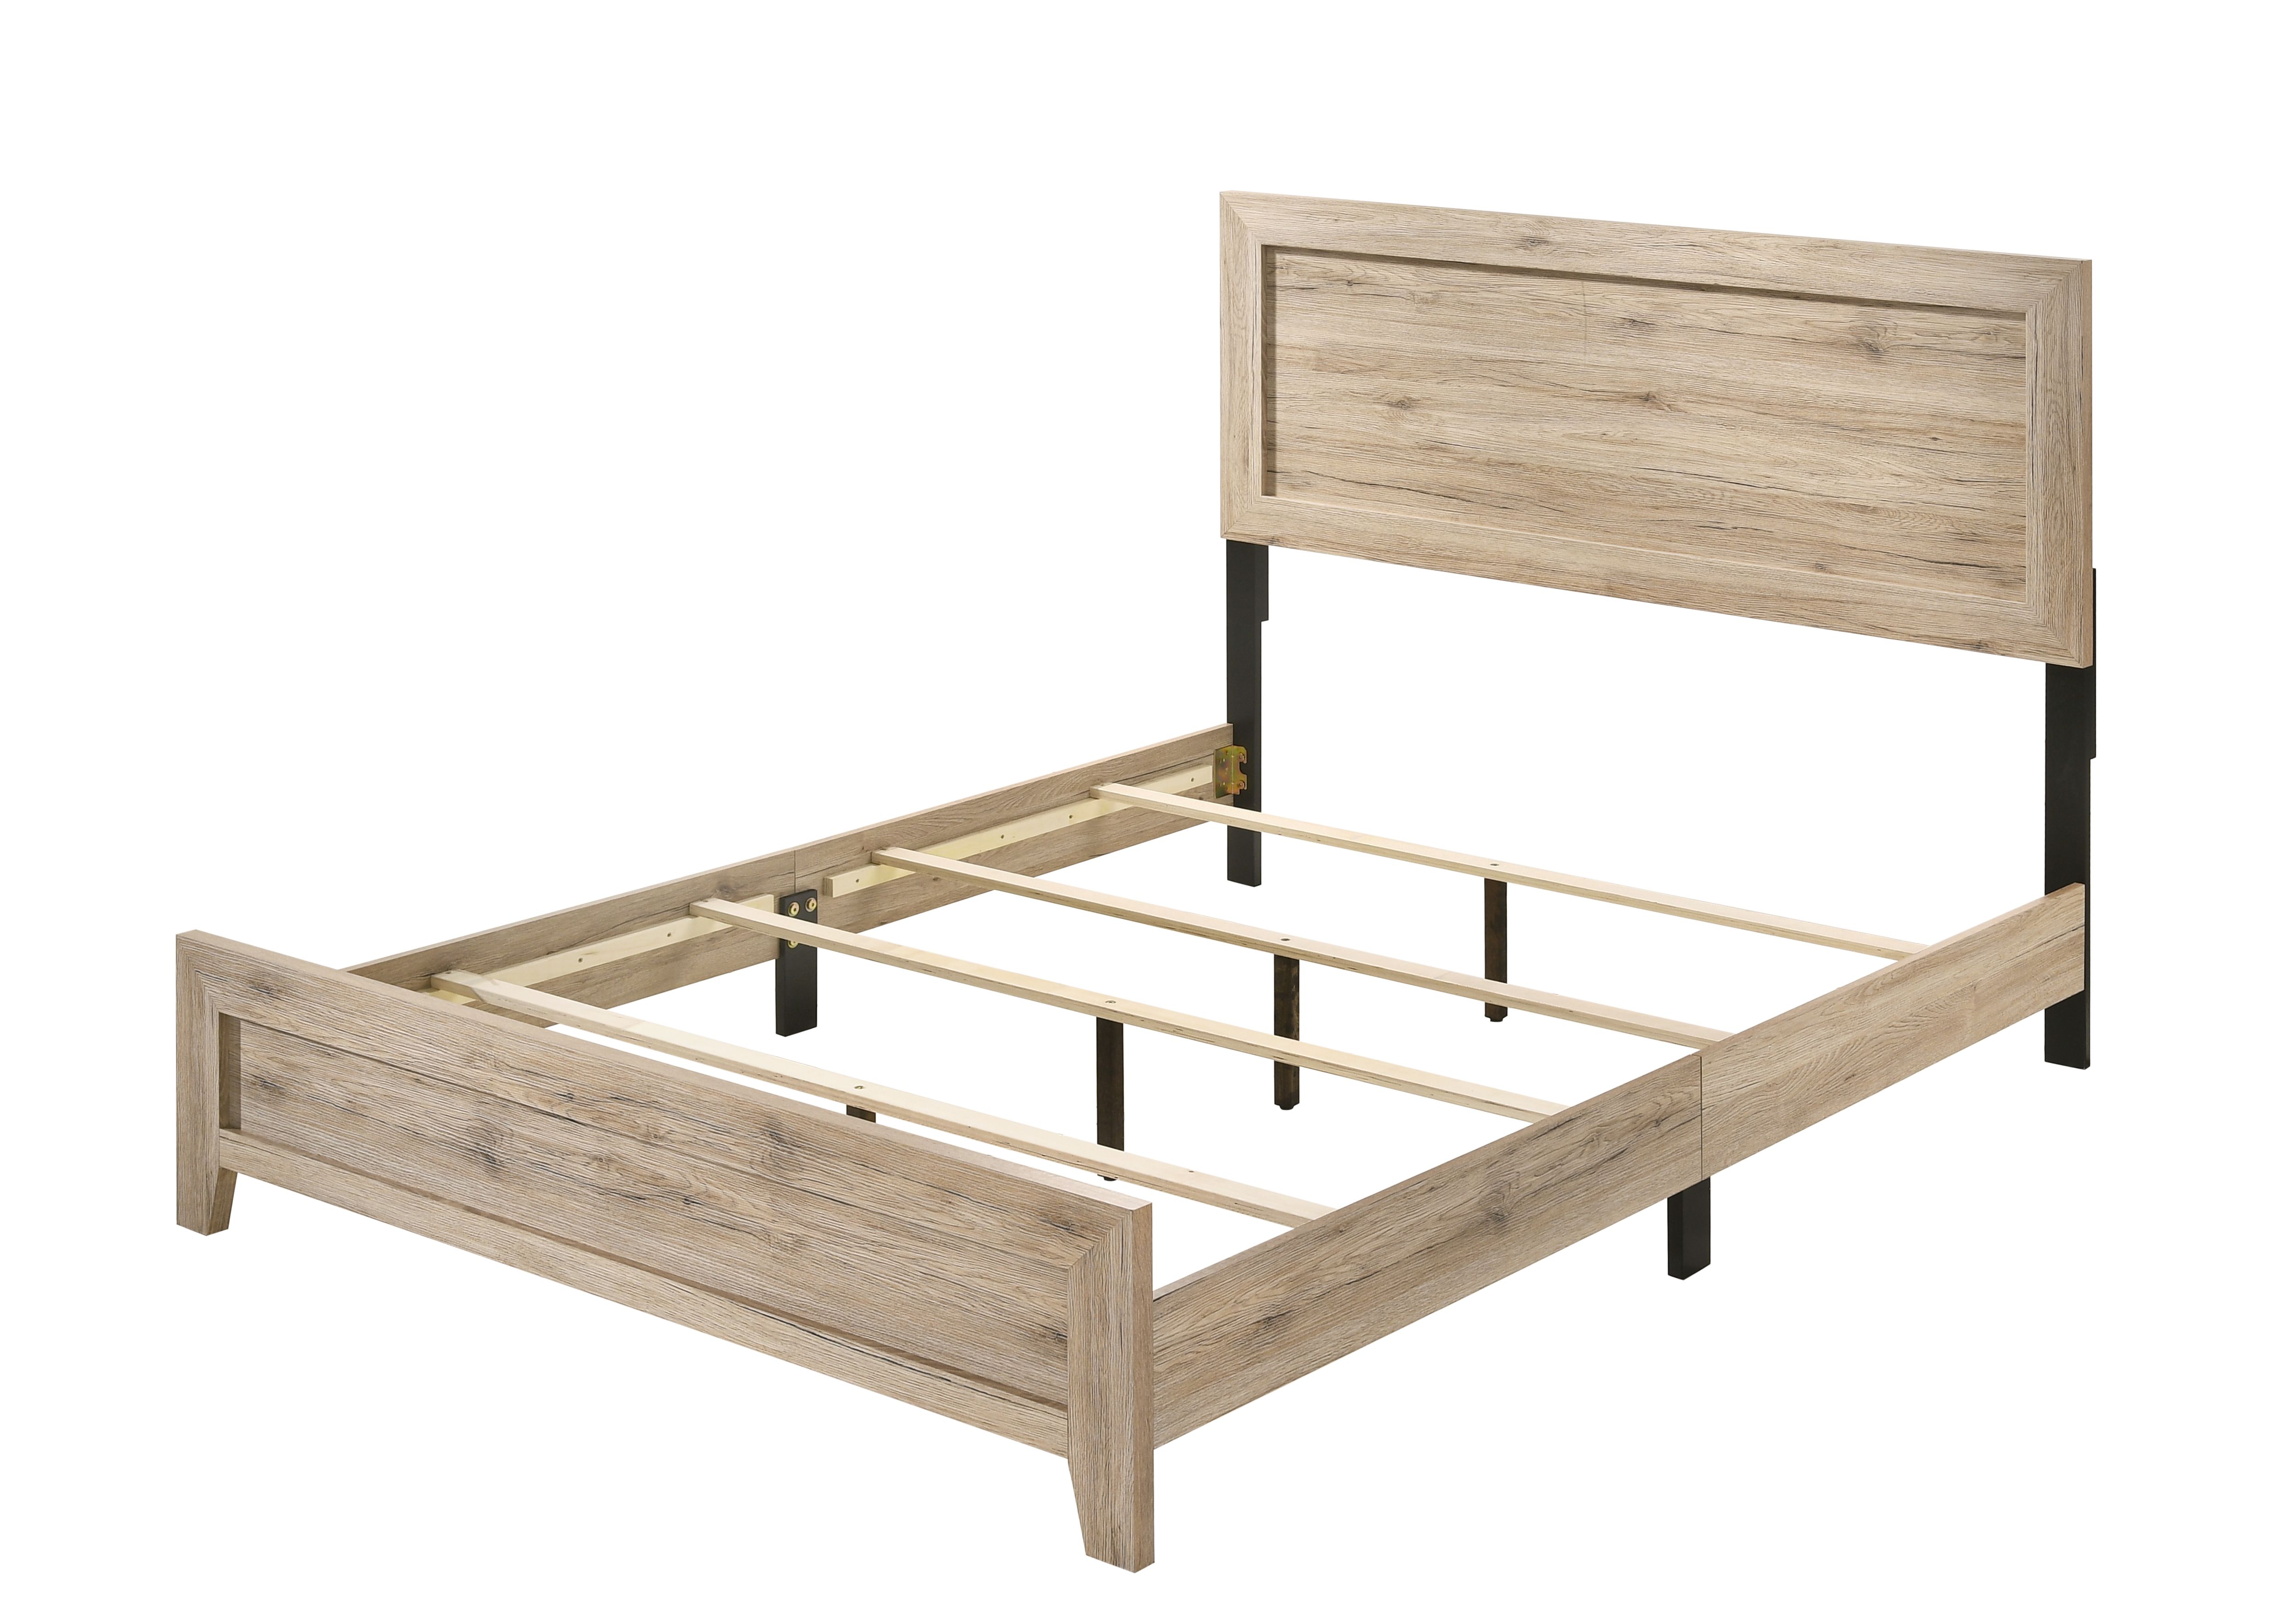 Miekor Furniture Miquell Eastern King Bed, Natural - image 2 of 2